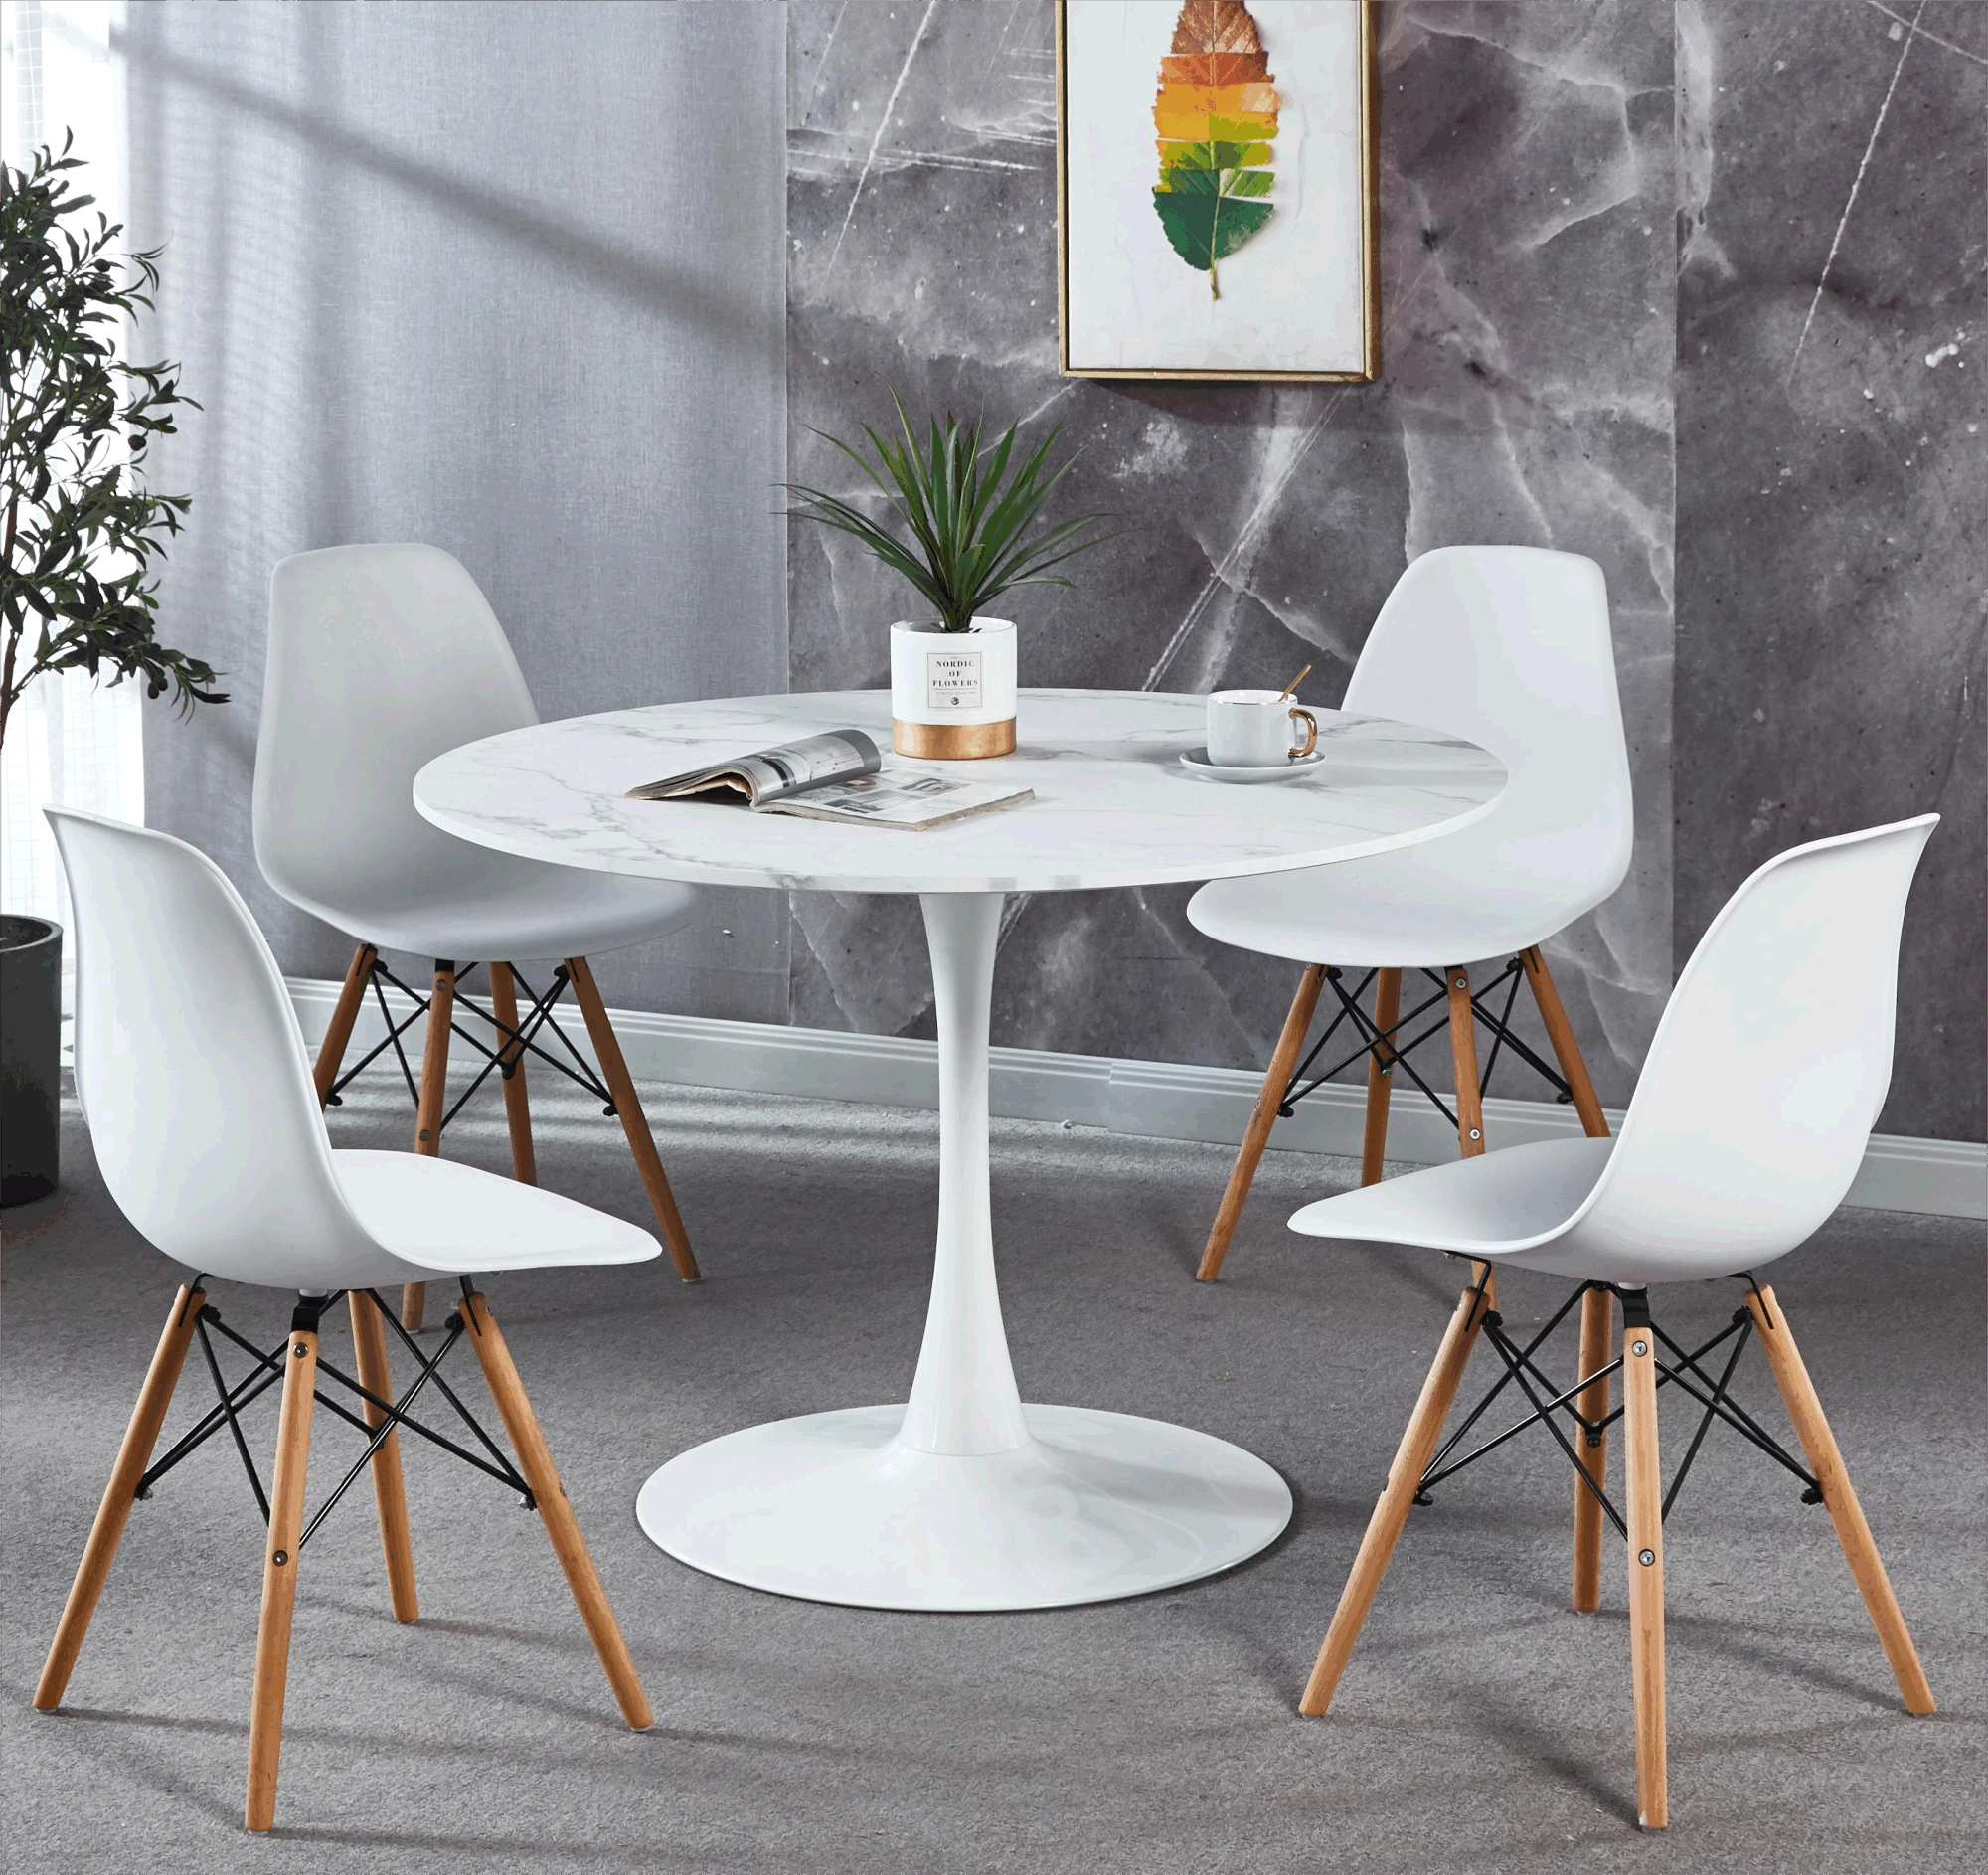 Dropship 42.1"White Tulip Table Mid Century Dining Table For 4 6 People  With Round Mdf Table Top; Pedestal Dining Table; End Table Leisure Coffee  Table To Sell Online At A Lower Price | Doba Within Coffee Tables For 4 6 People (Photo 10 of 15)